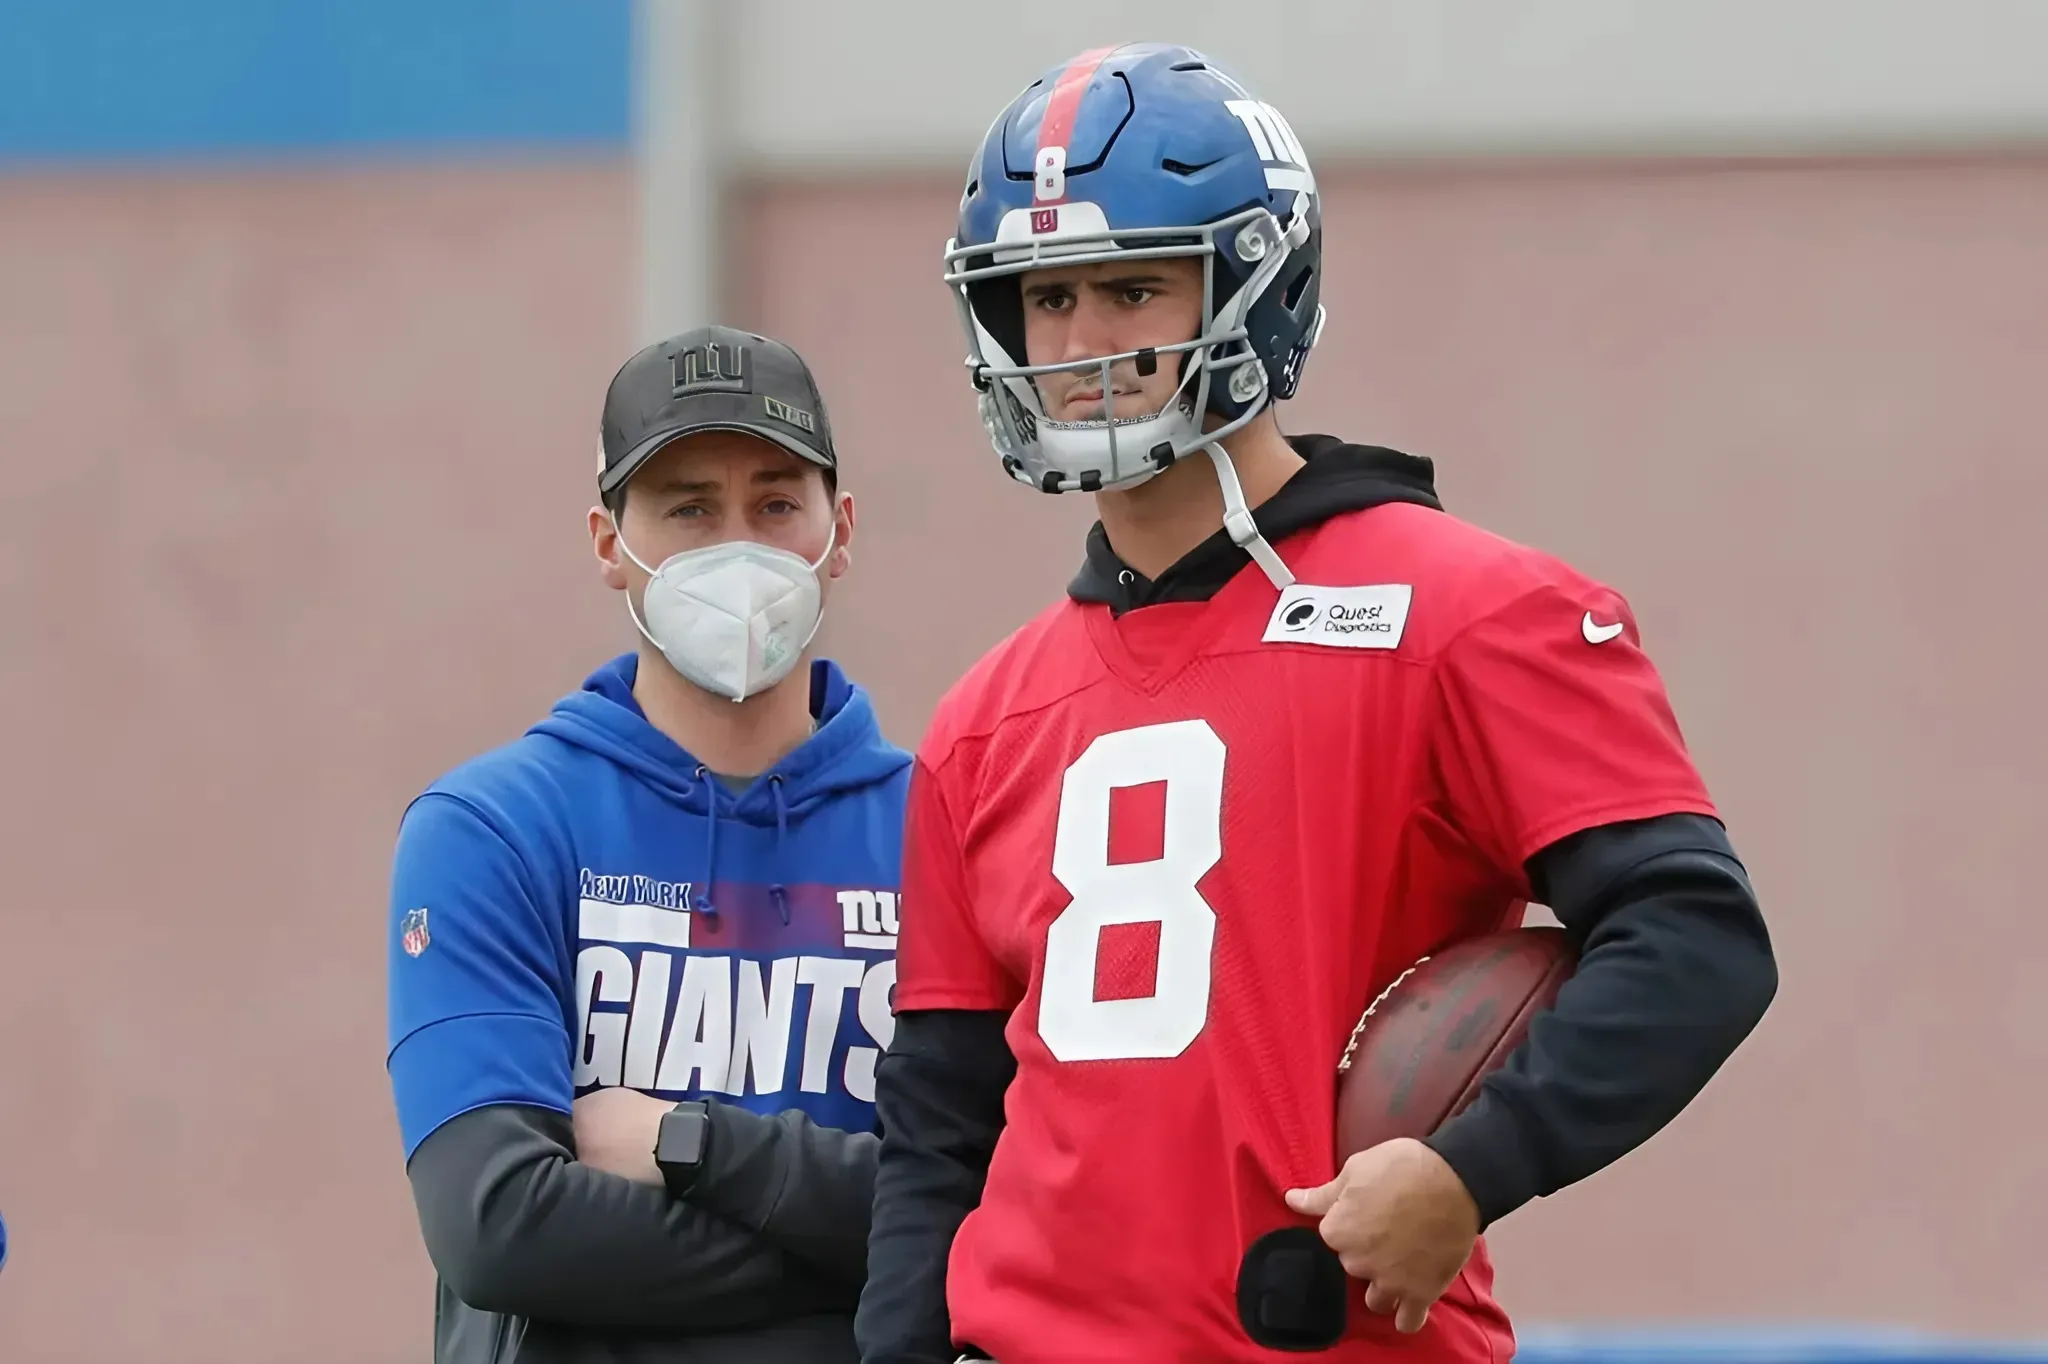 Giants Pushed to ‘Go All In’ on Expensive Daniel Jones Replacement in 2025